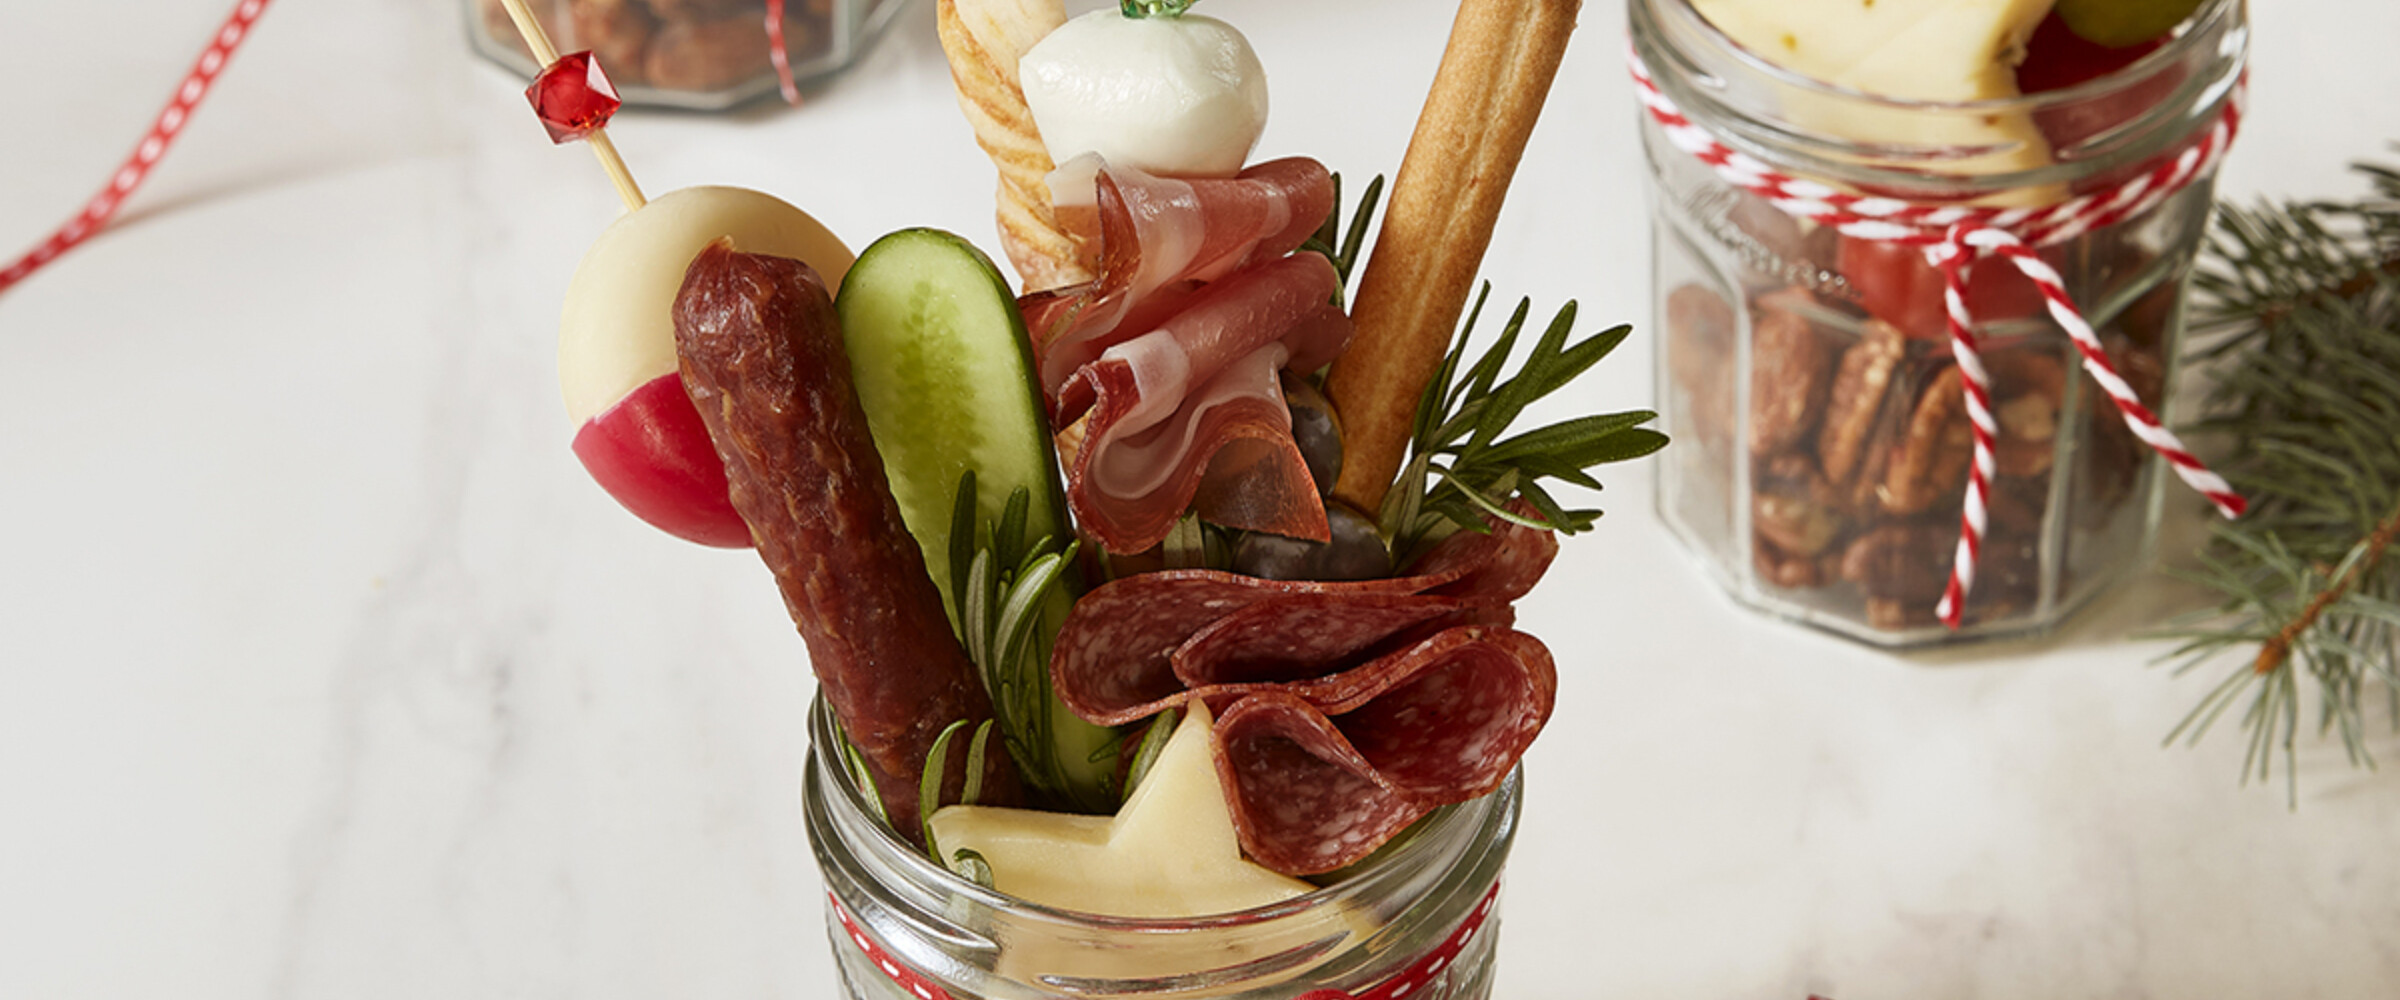 Charcuterie in a jar with a holiday touch